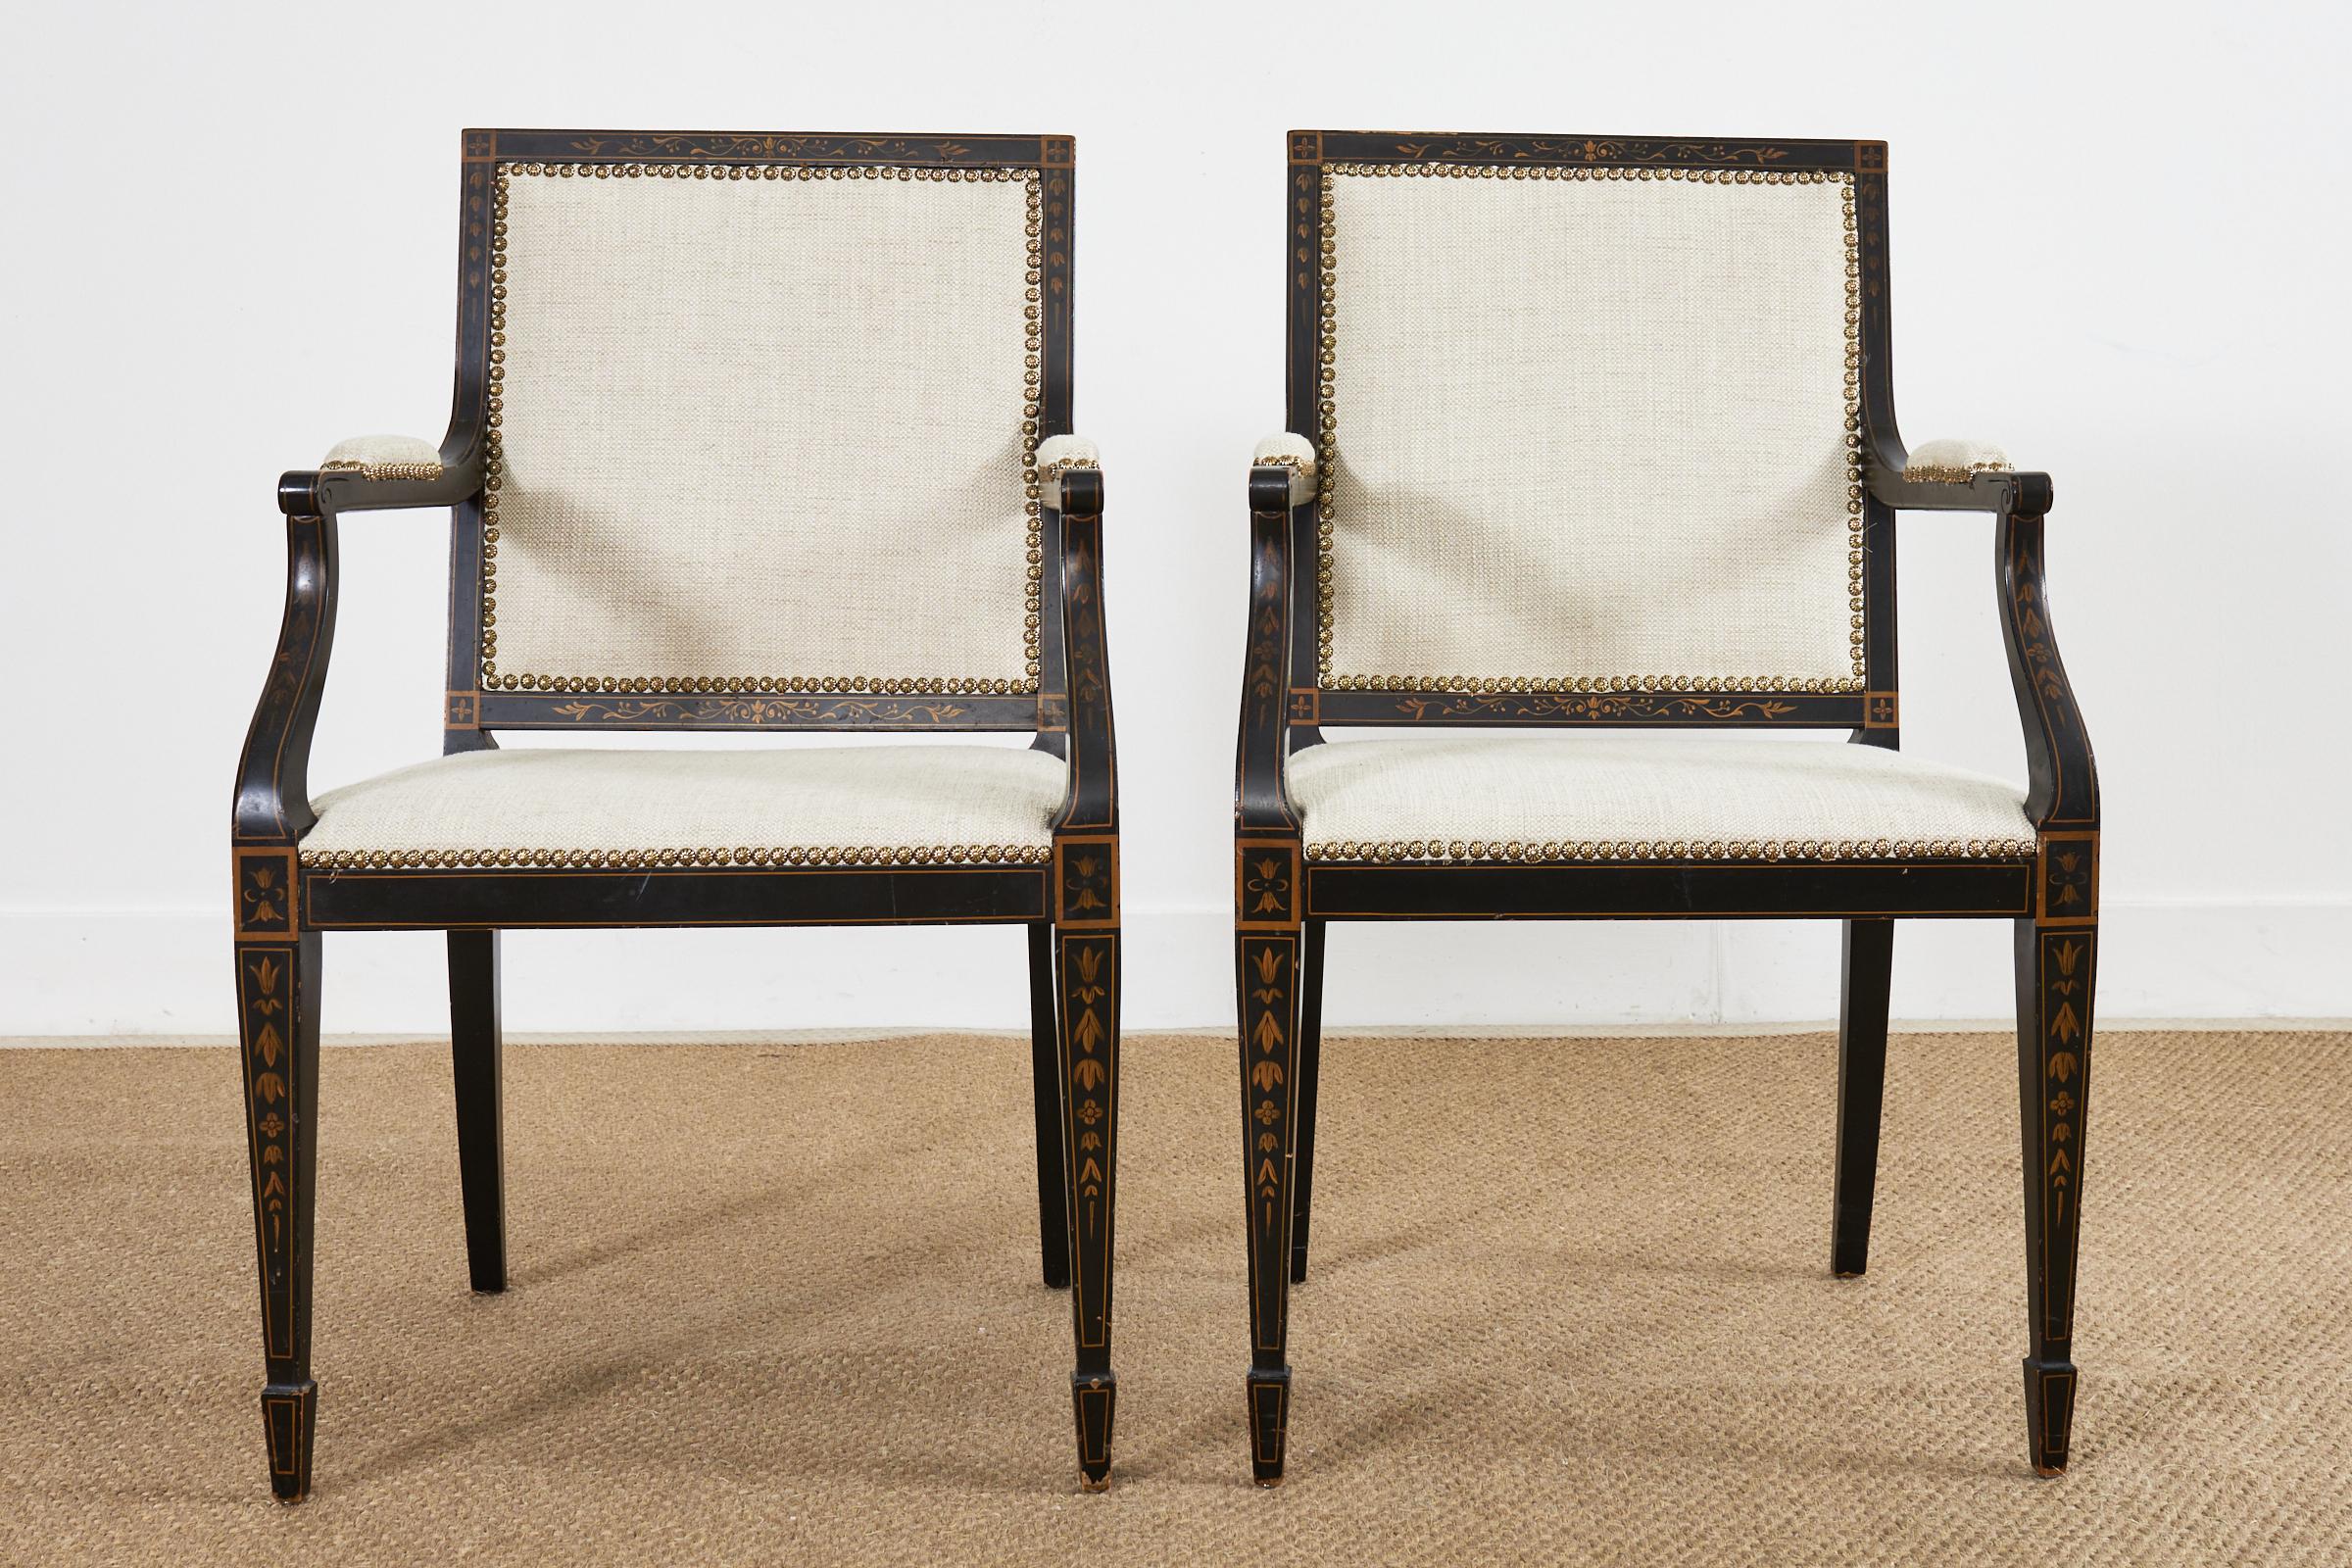 American Pair of Neoclassical Regency Style Ebonized Mahogany Library Chairs